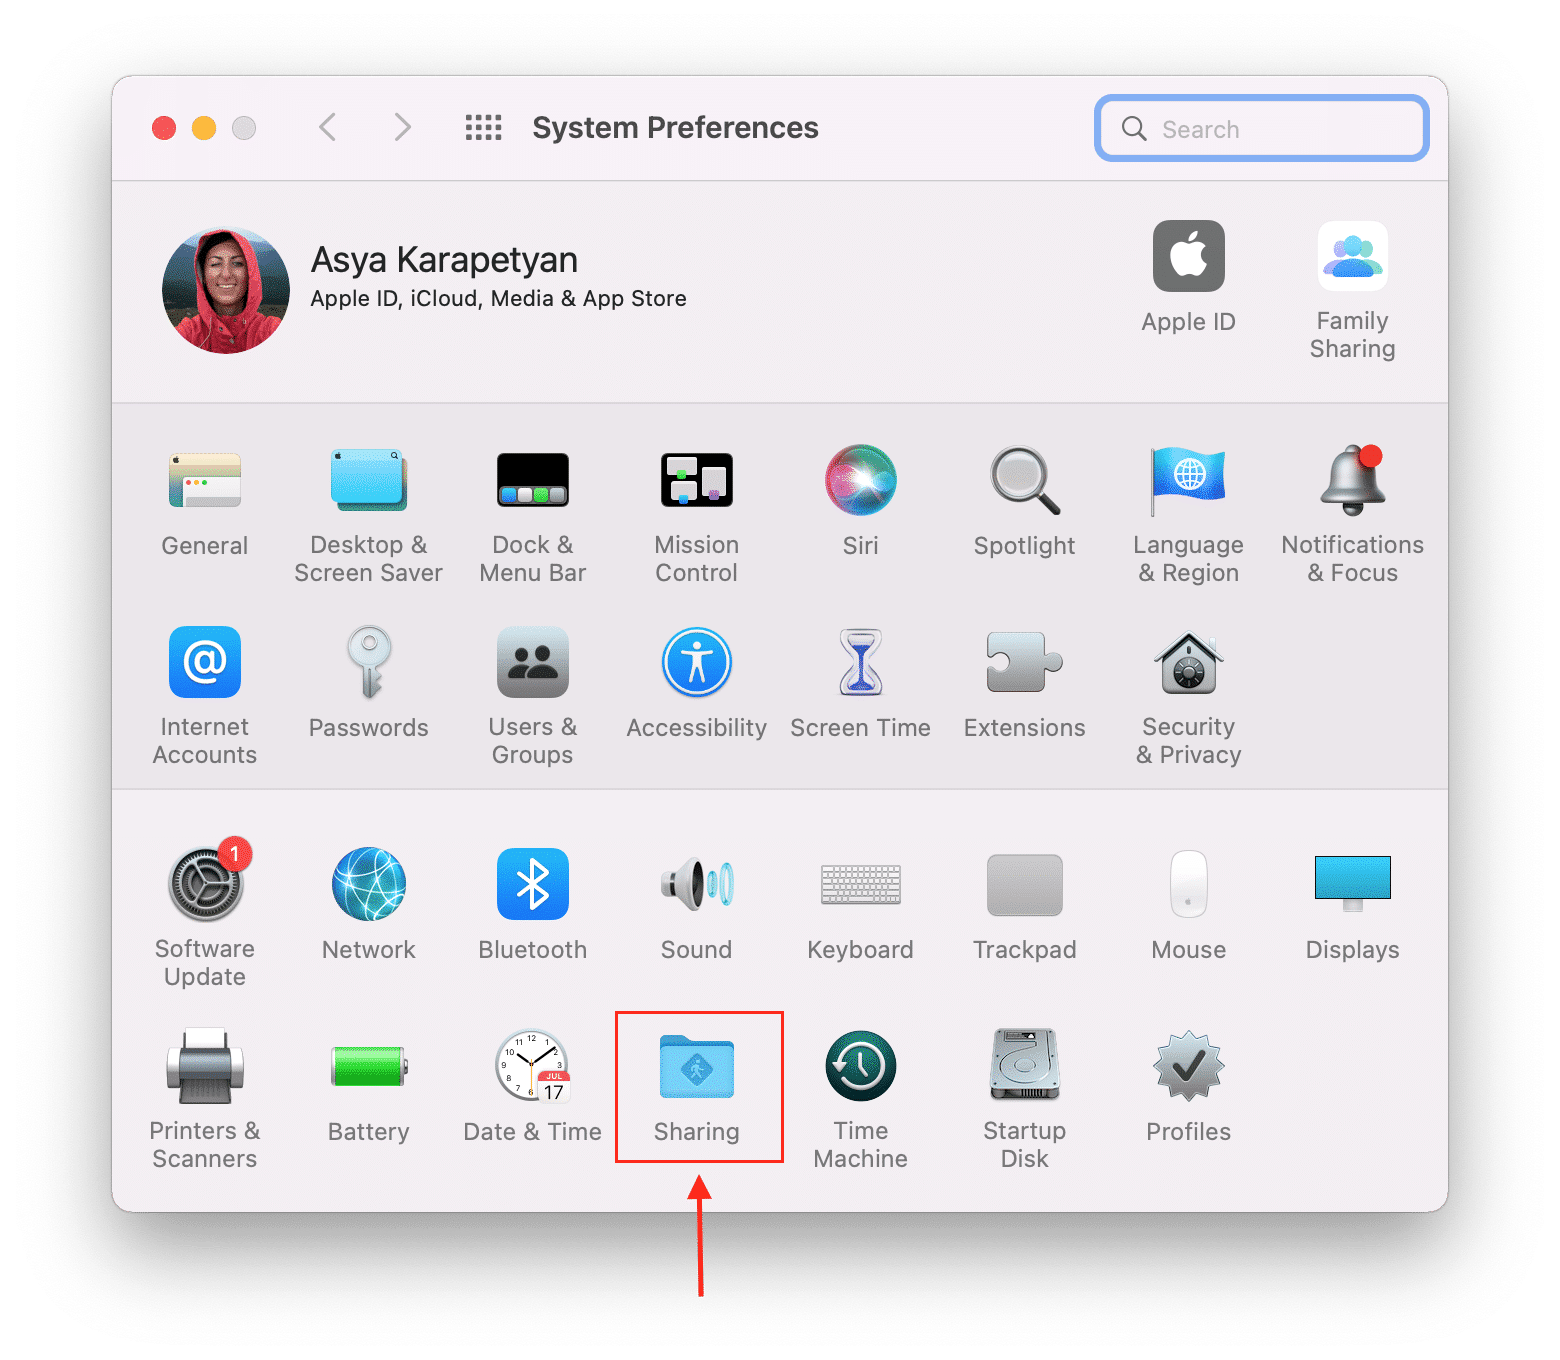 System Preferences window with Share category highlighted